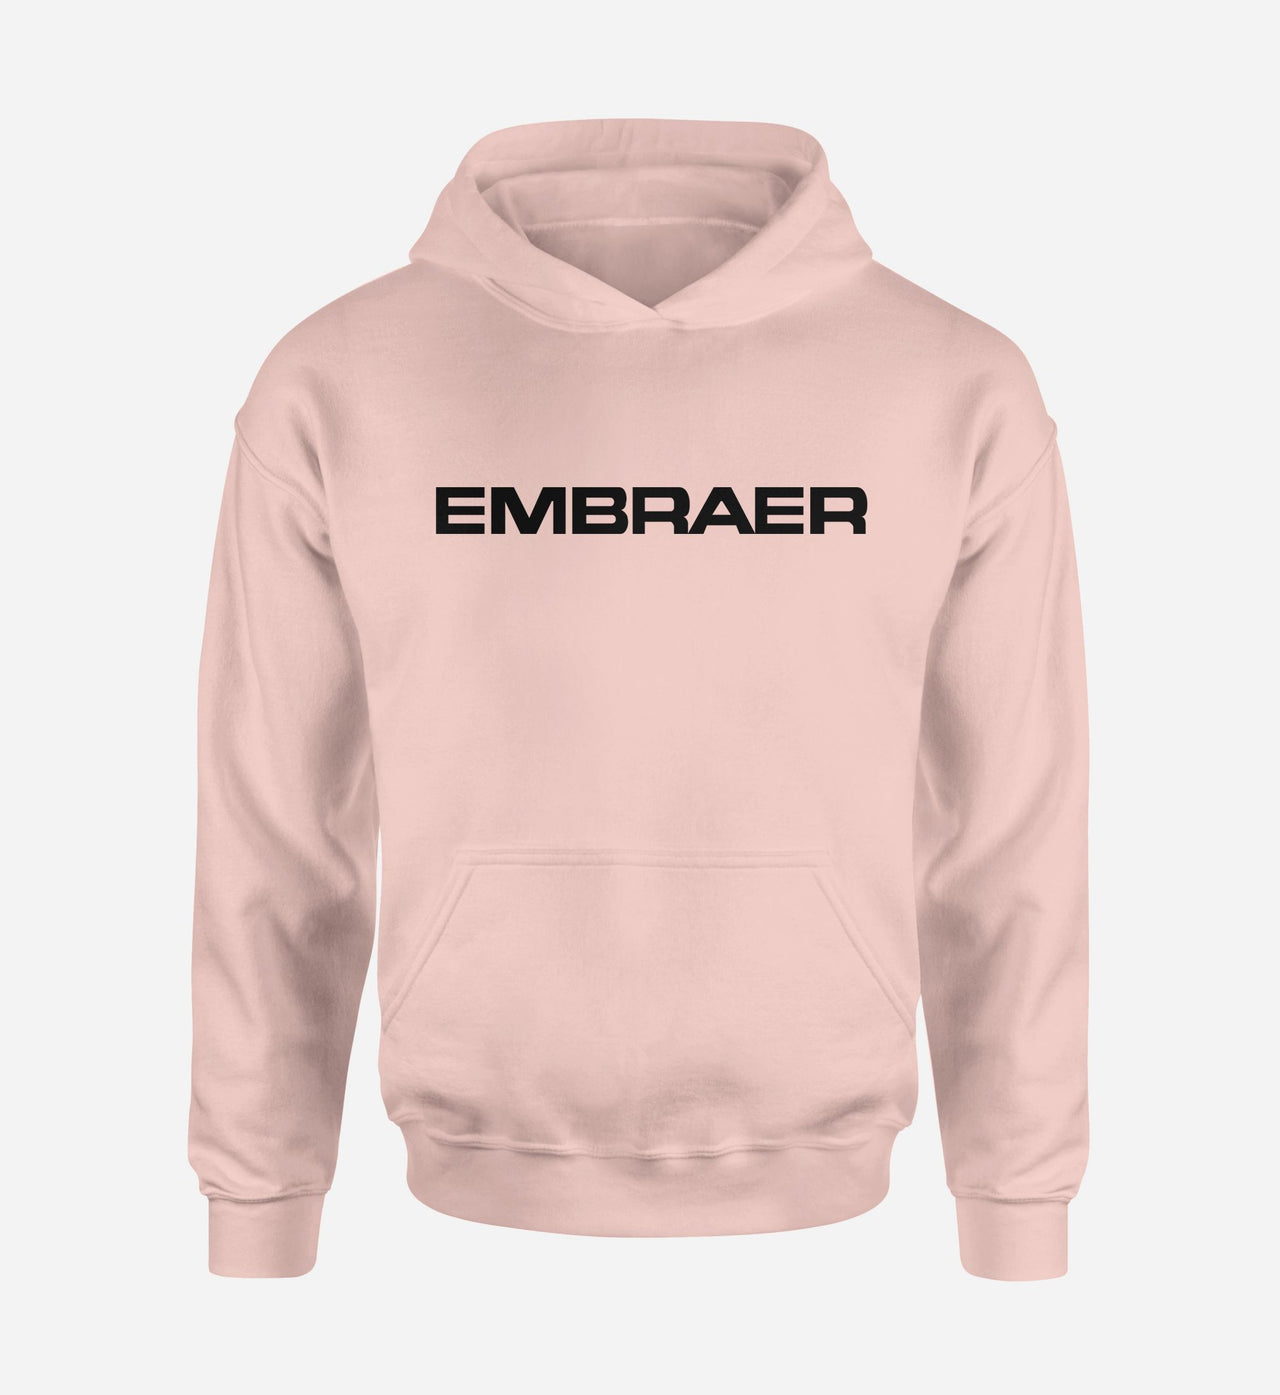 Embraer & Text Designed Hoodies